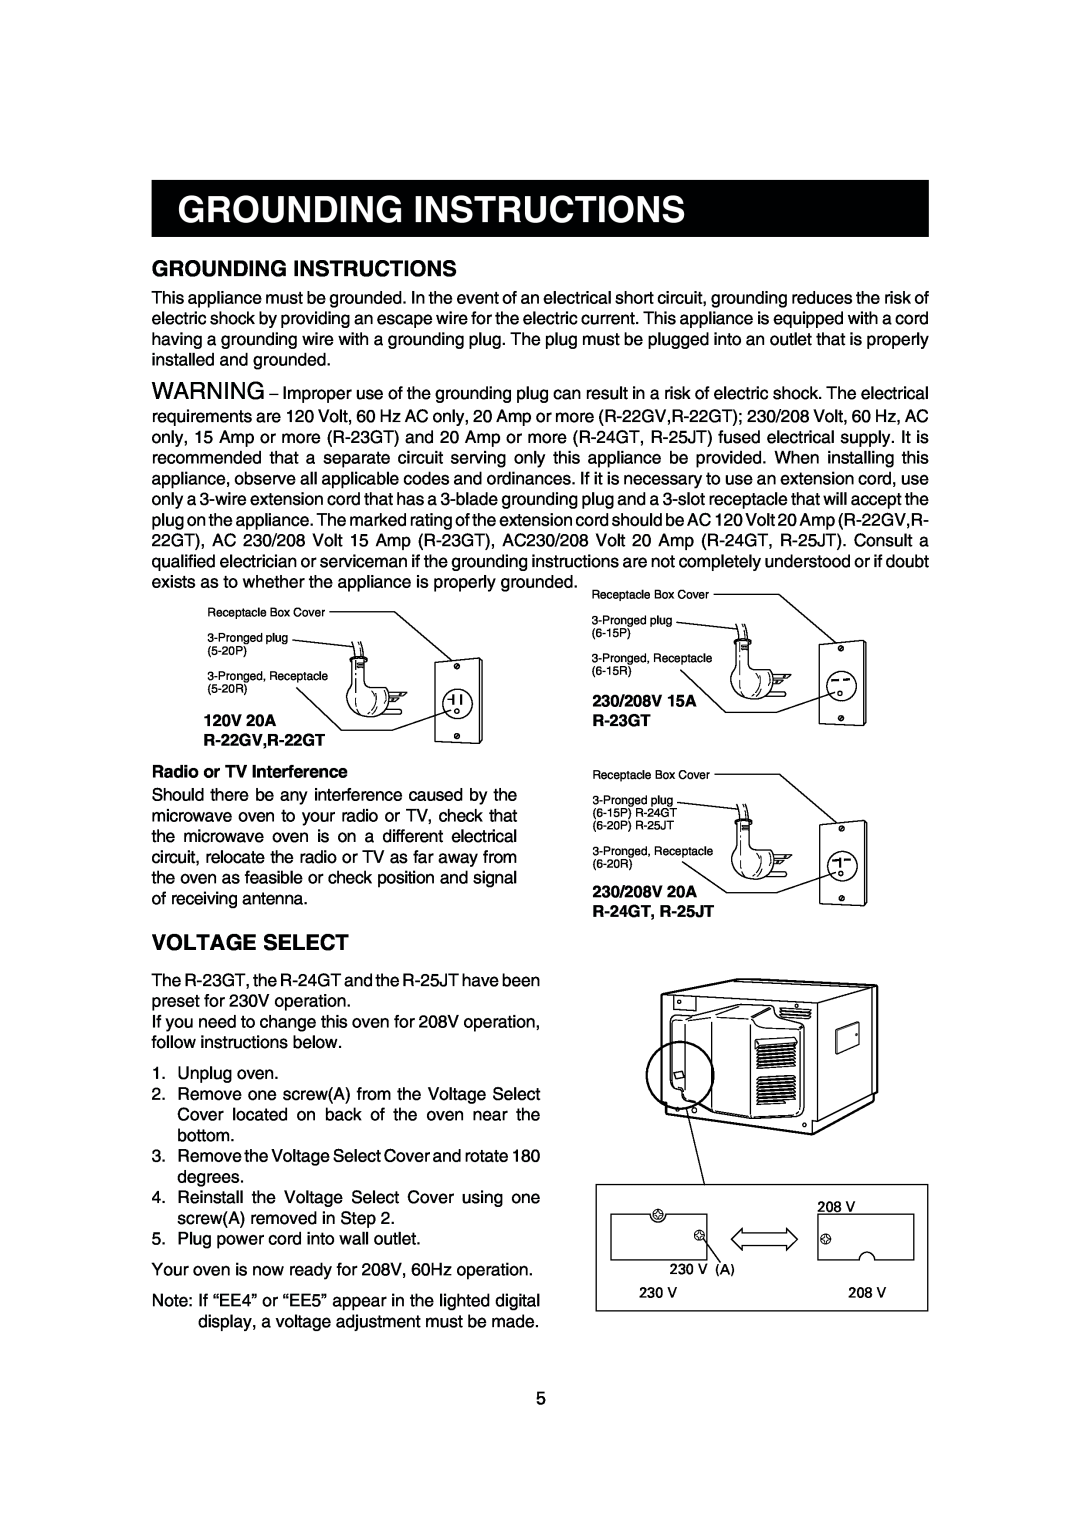 Sharp R-25JT, R-22GT, R-24GT, R-23GT operation manual Grounding Instructions, Voltage Select, Radio or TV Interference 